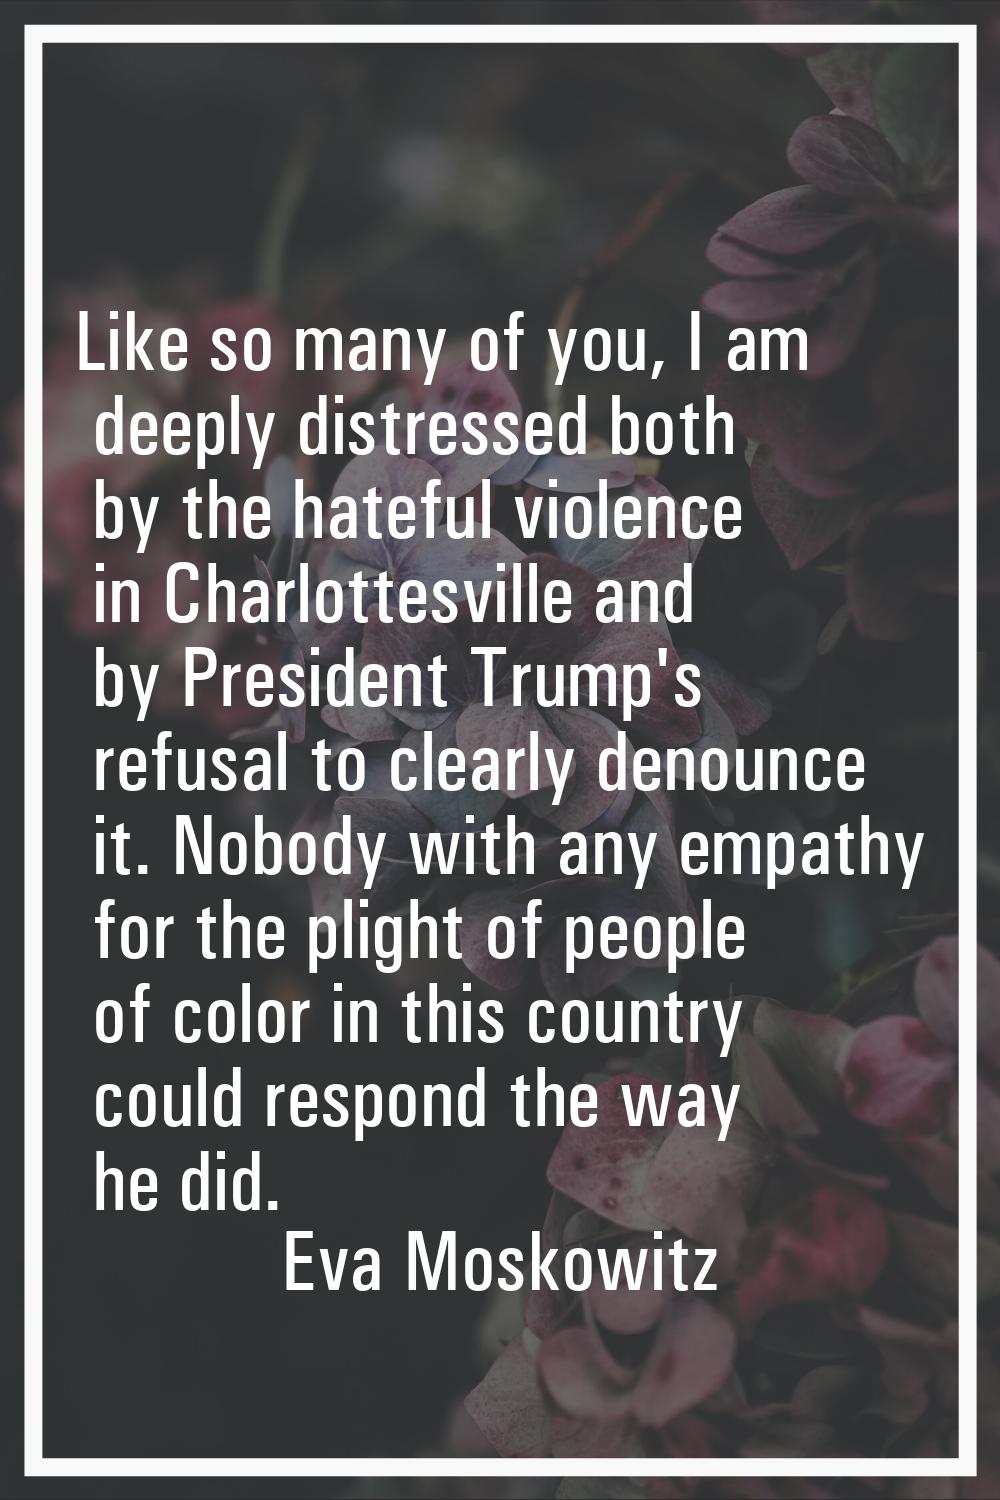 Like so many of you, I am deeply distressed both by the hateful violence in Charlottesville and by 